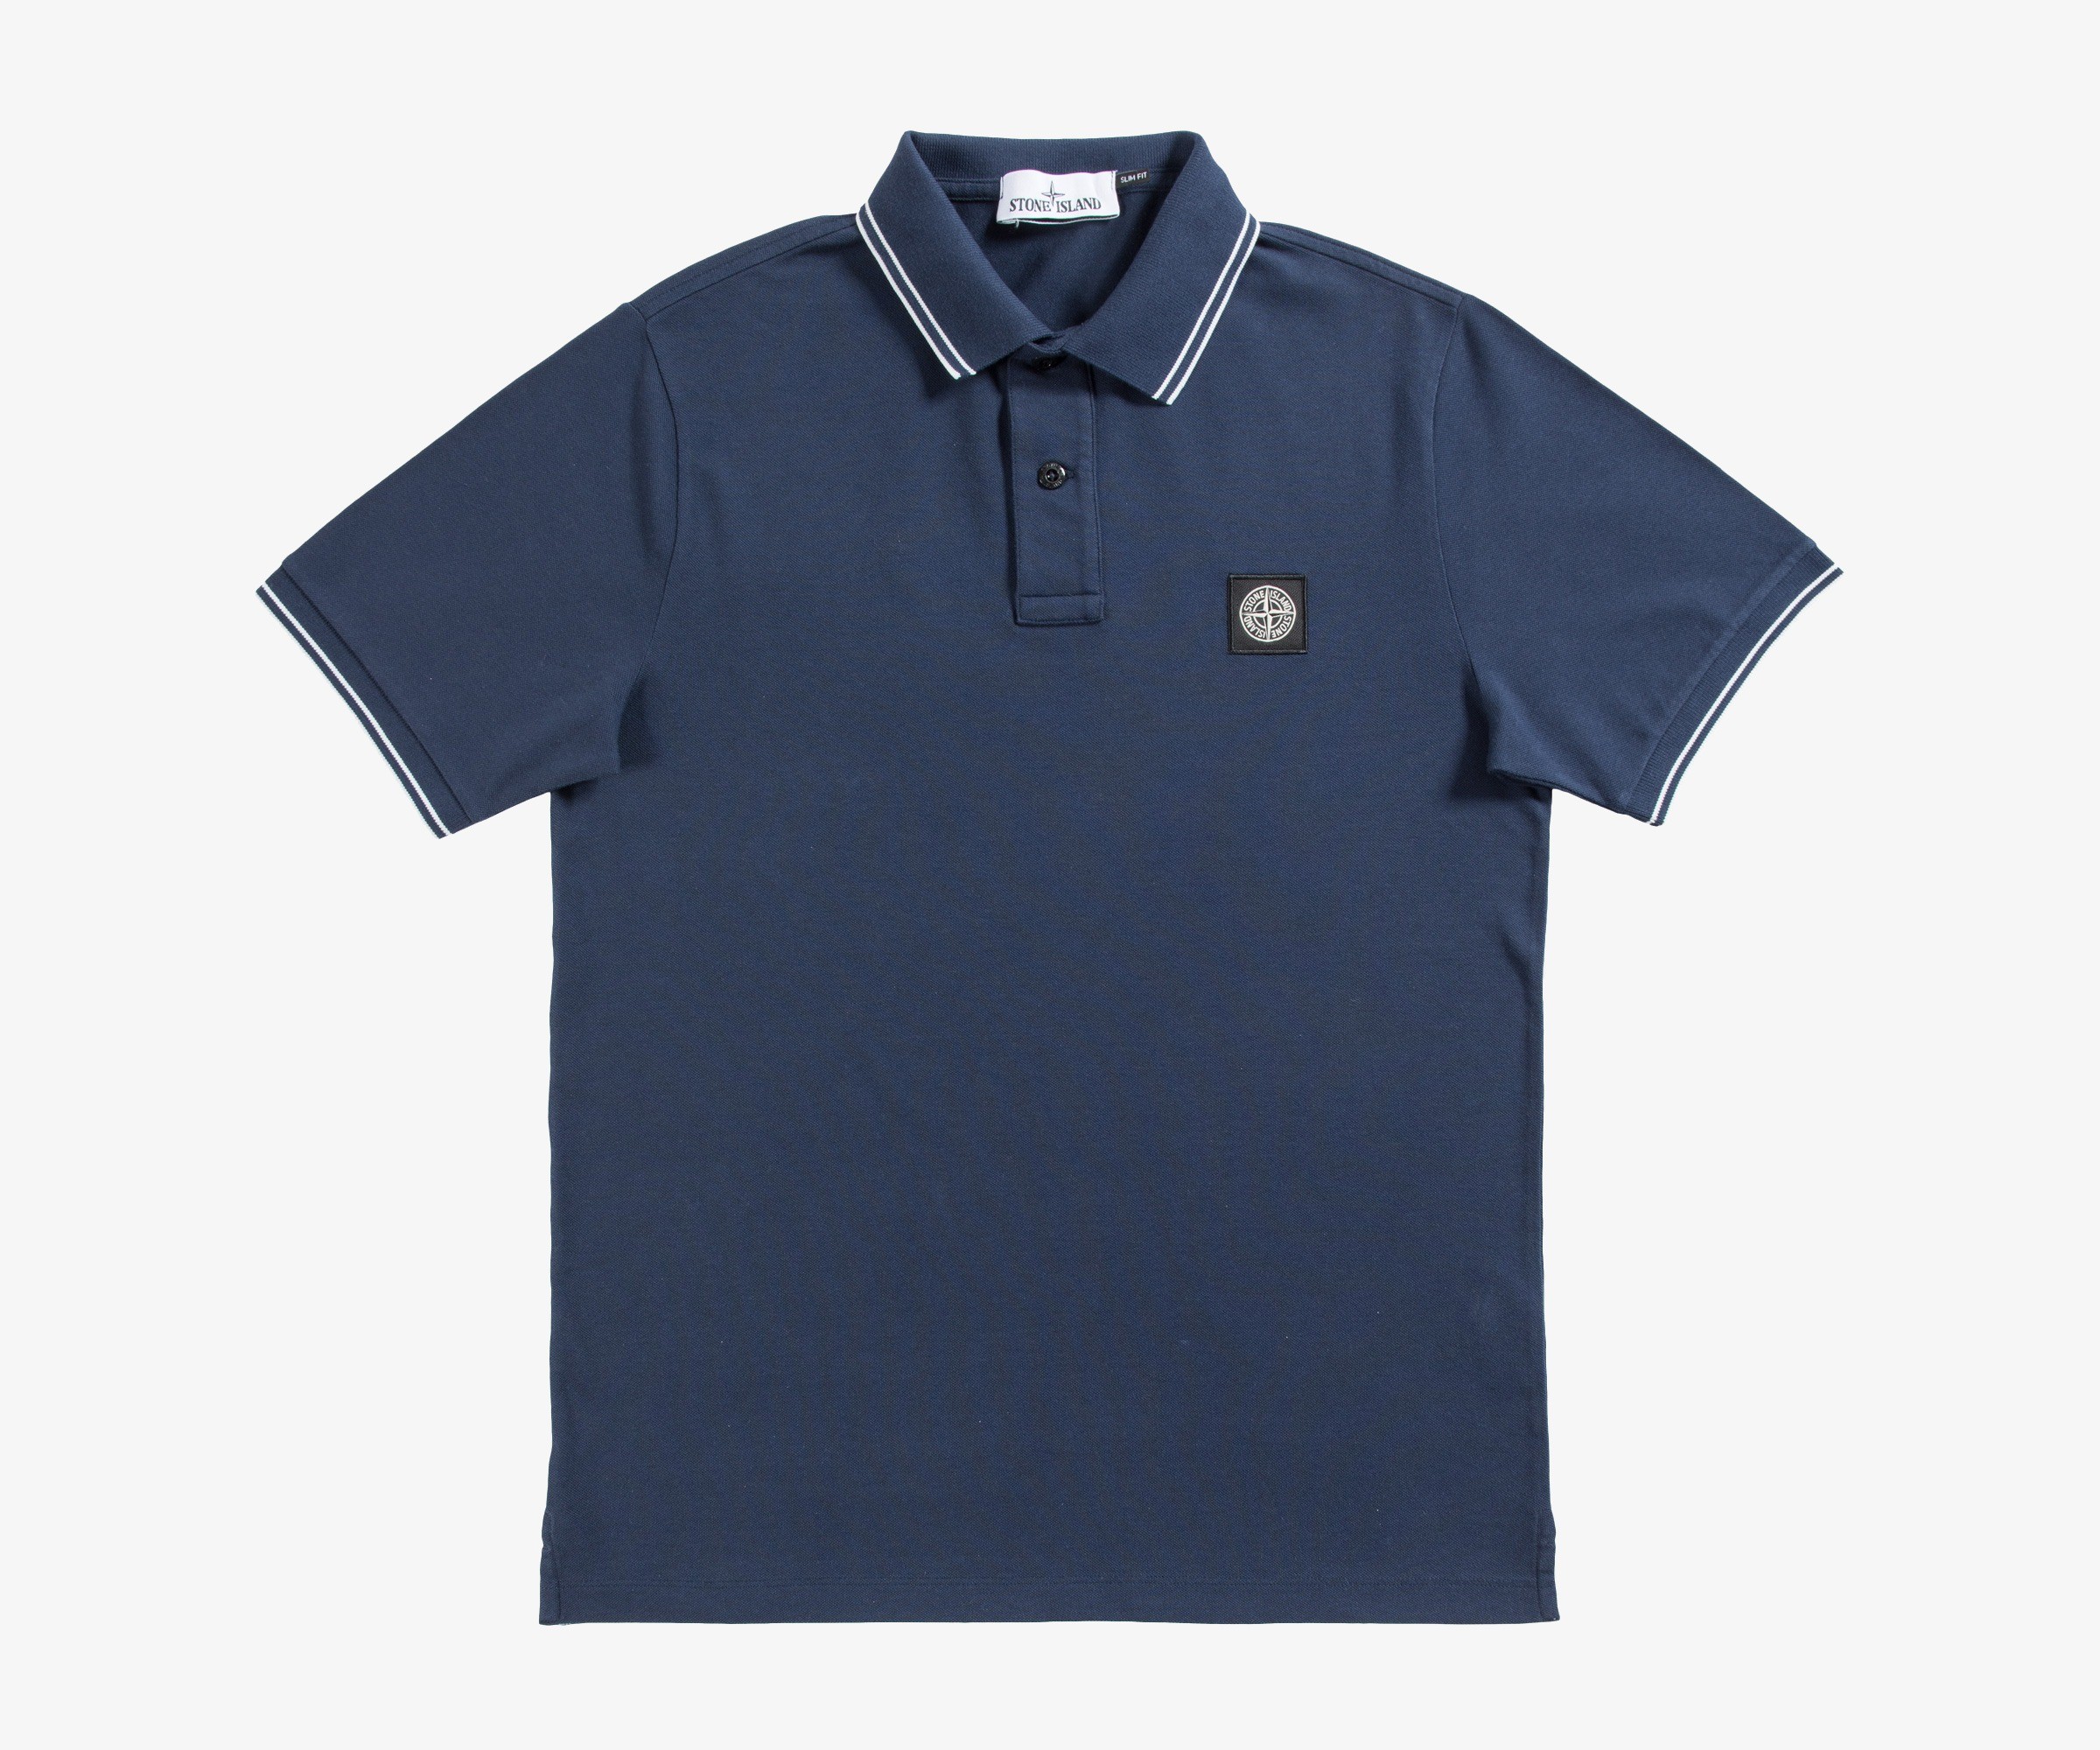 Stone Island Slim Fit 2-Button Polo With Collar & Cuff Trim Navy